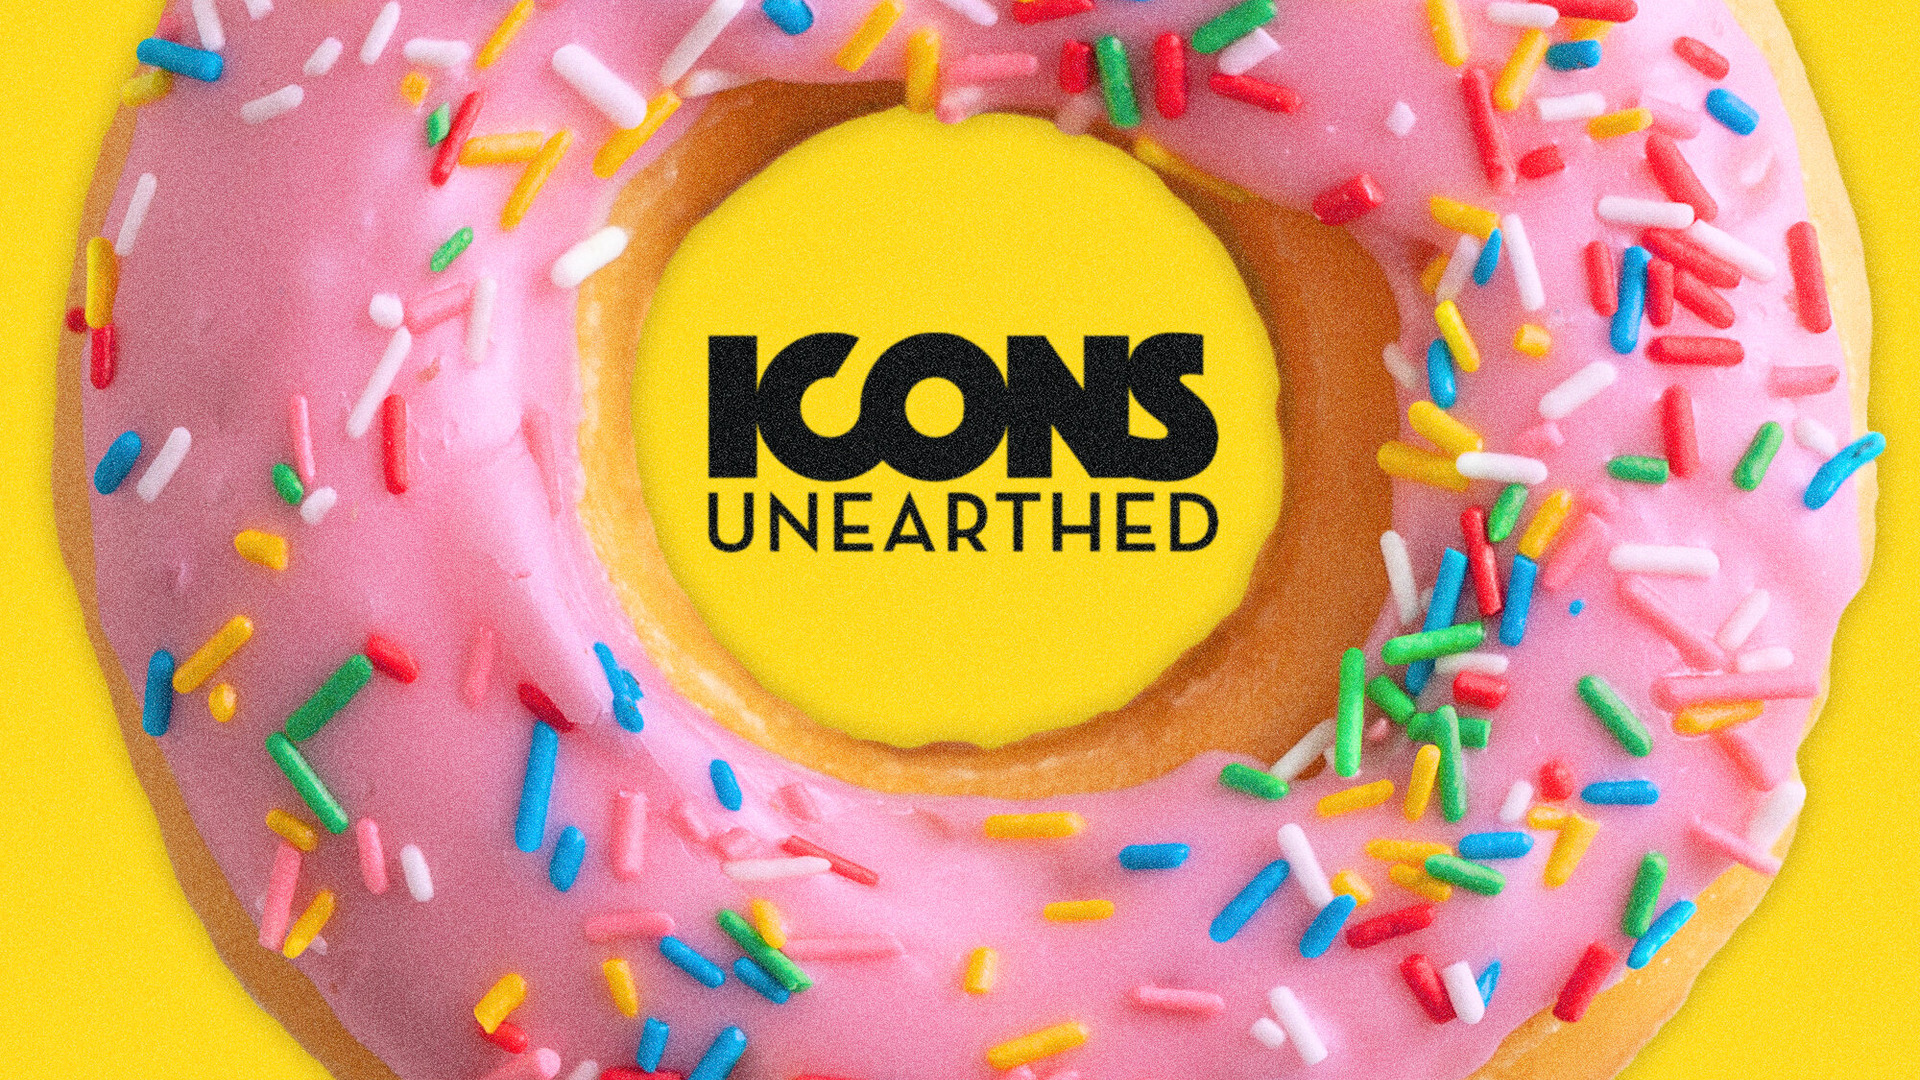 Show Icons Unearthed: The Simpsons